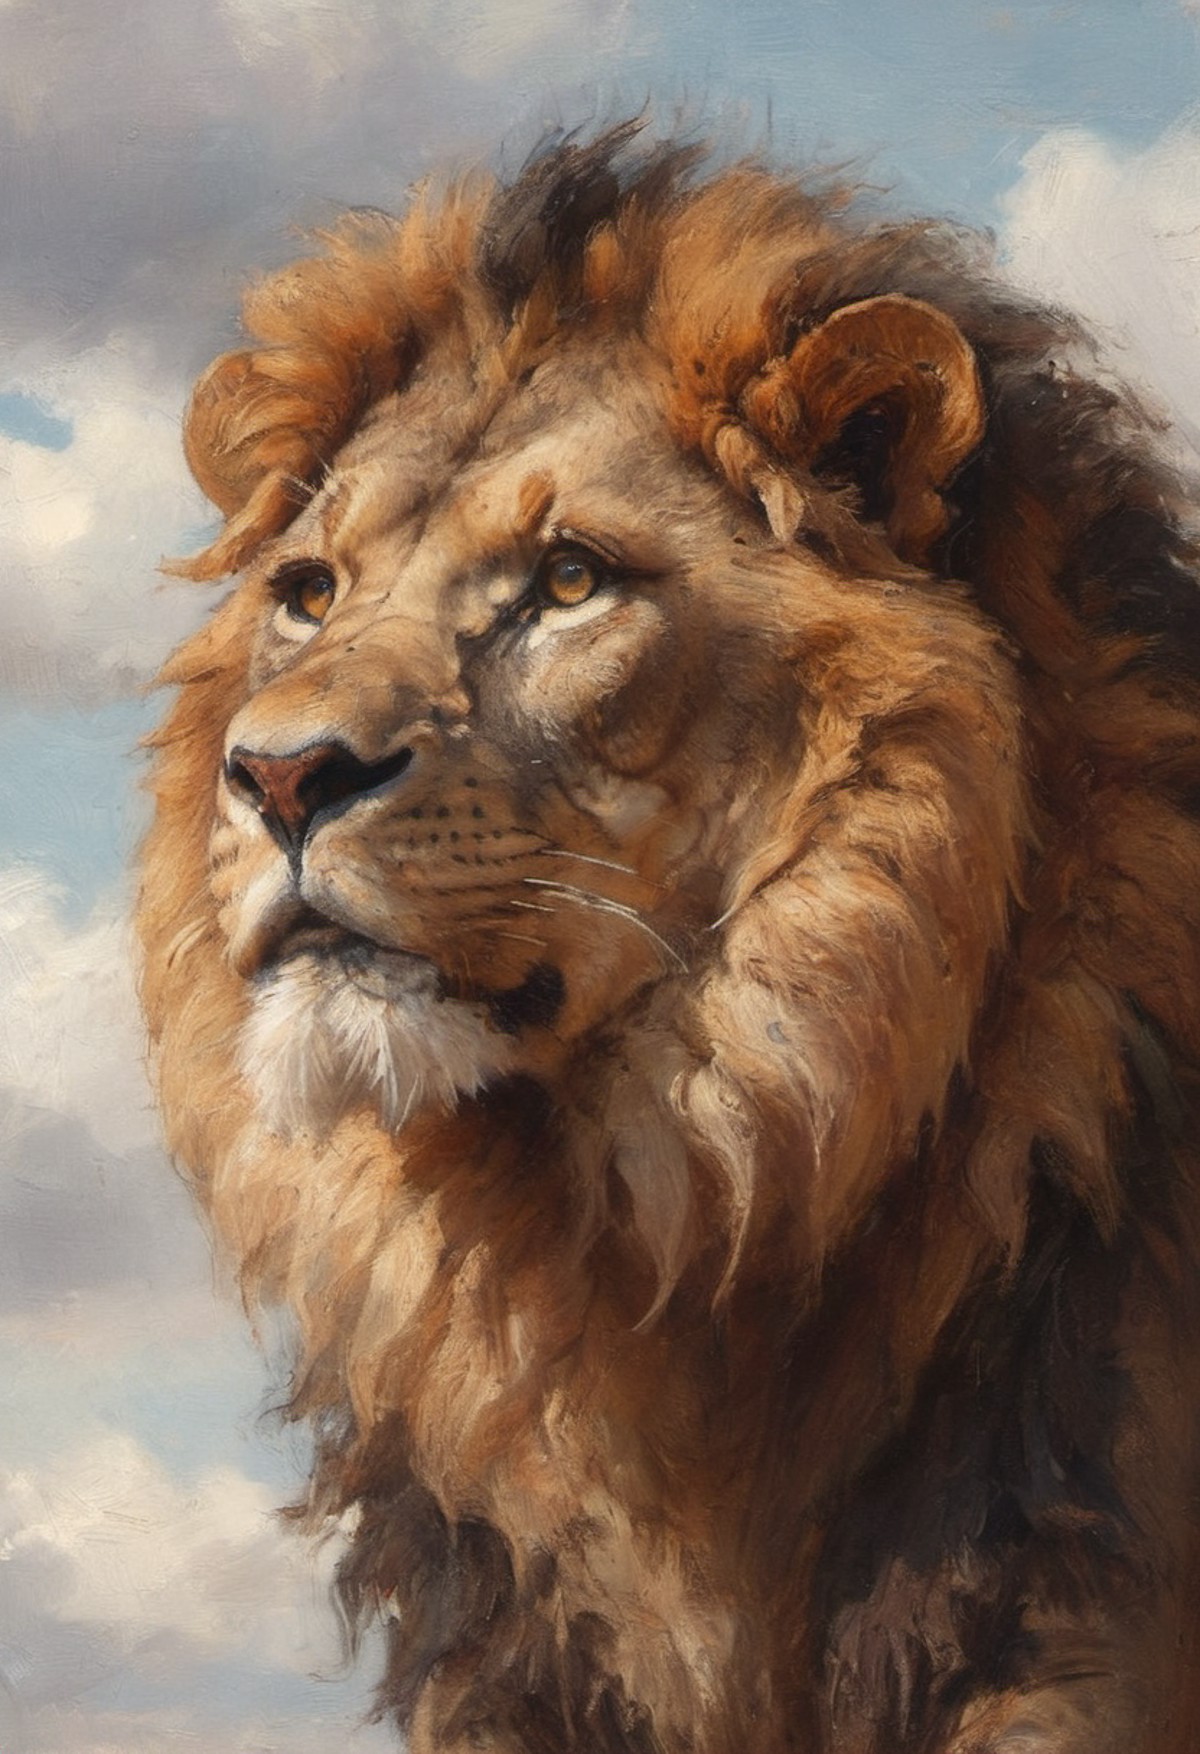 closeup portrait of an attentive majestic Lion with big glistening eyes standing bright sky background